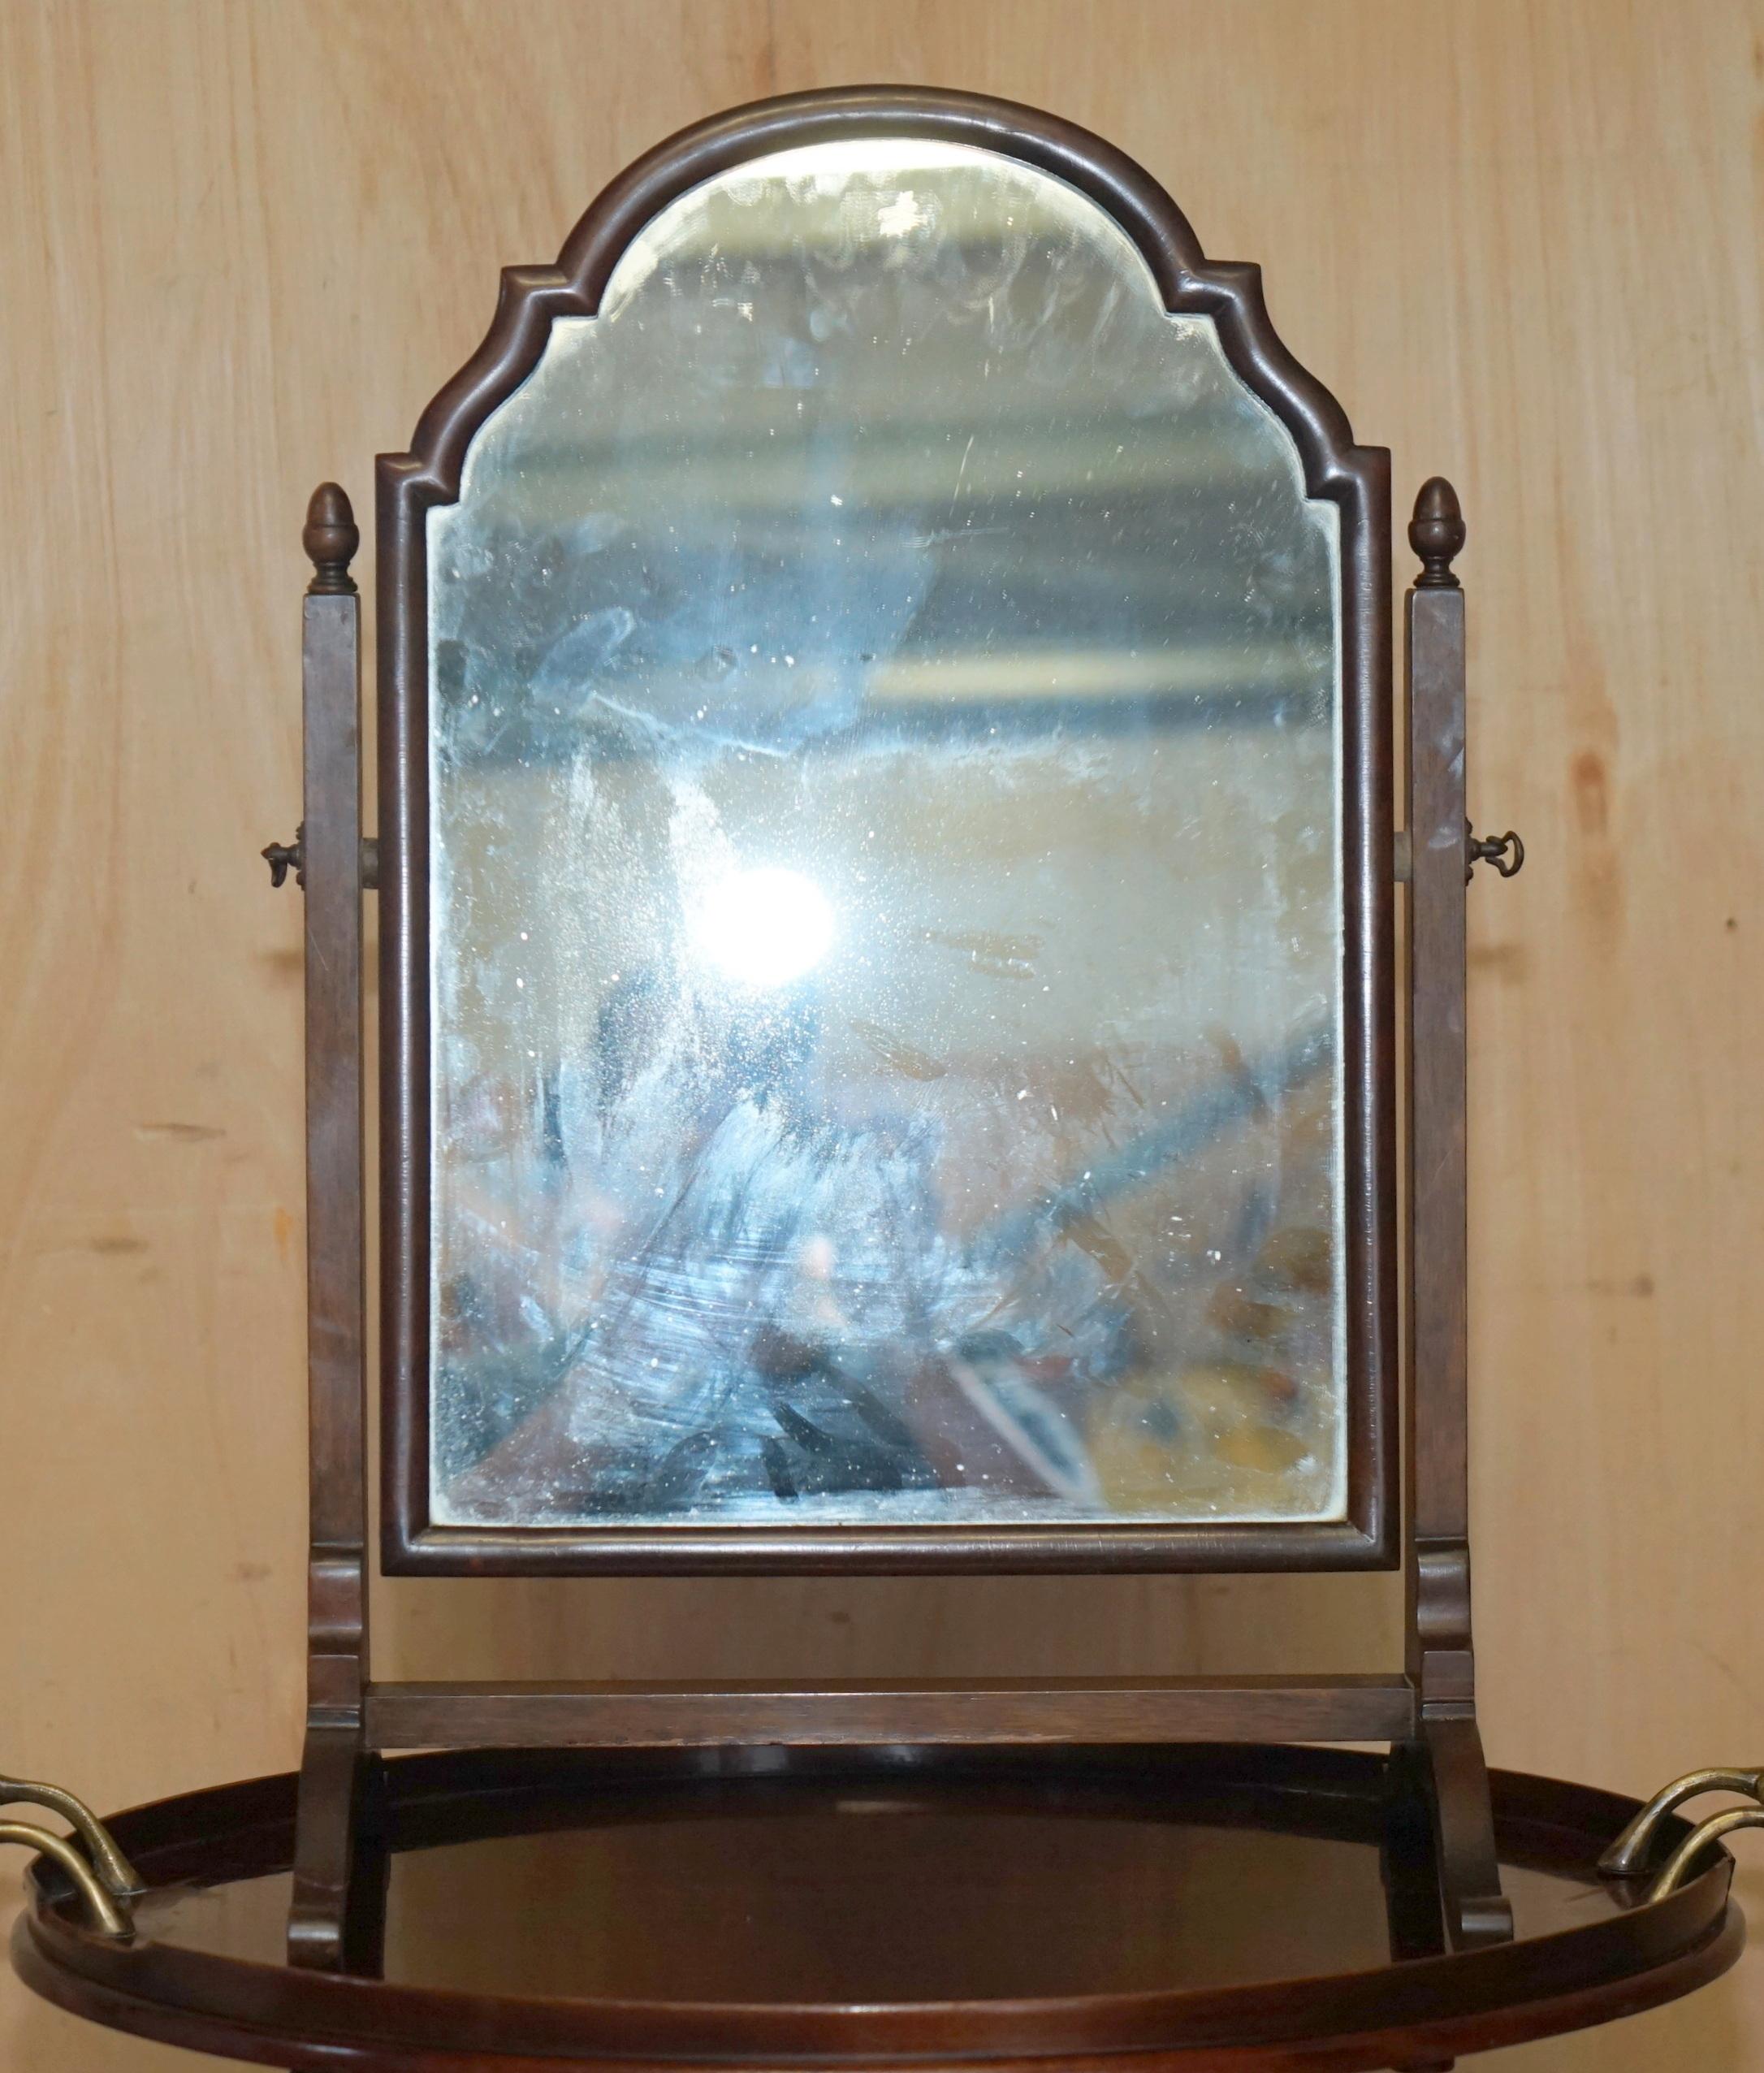 Royal House Antiques

Royal House Antiques is delighted to offer for sale this Original Circa 1880 Victorian Mahogany with original plate glass, table top Cheval mirror

Please note the delivery fee listed is just a guide, it covers within the M25